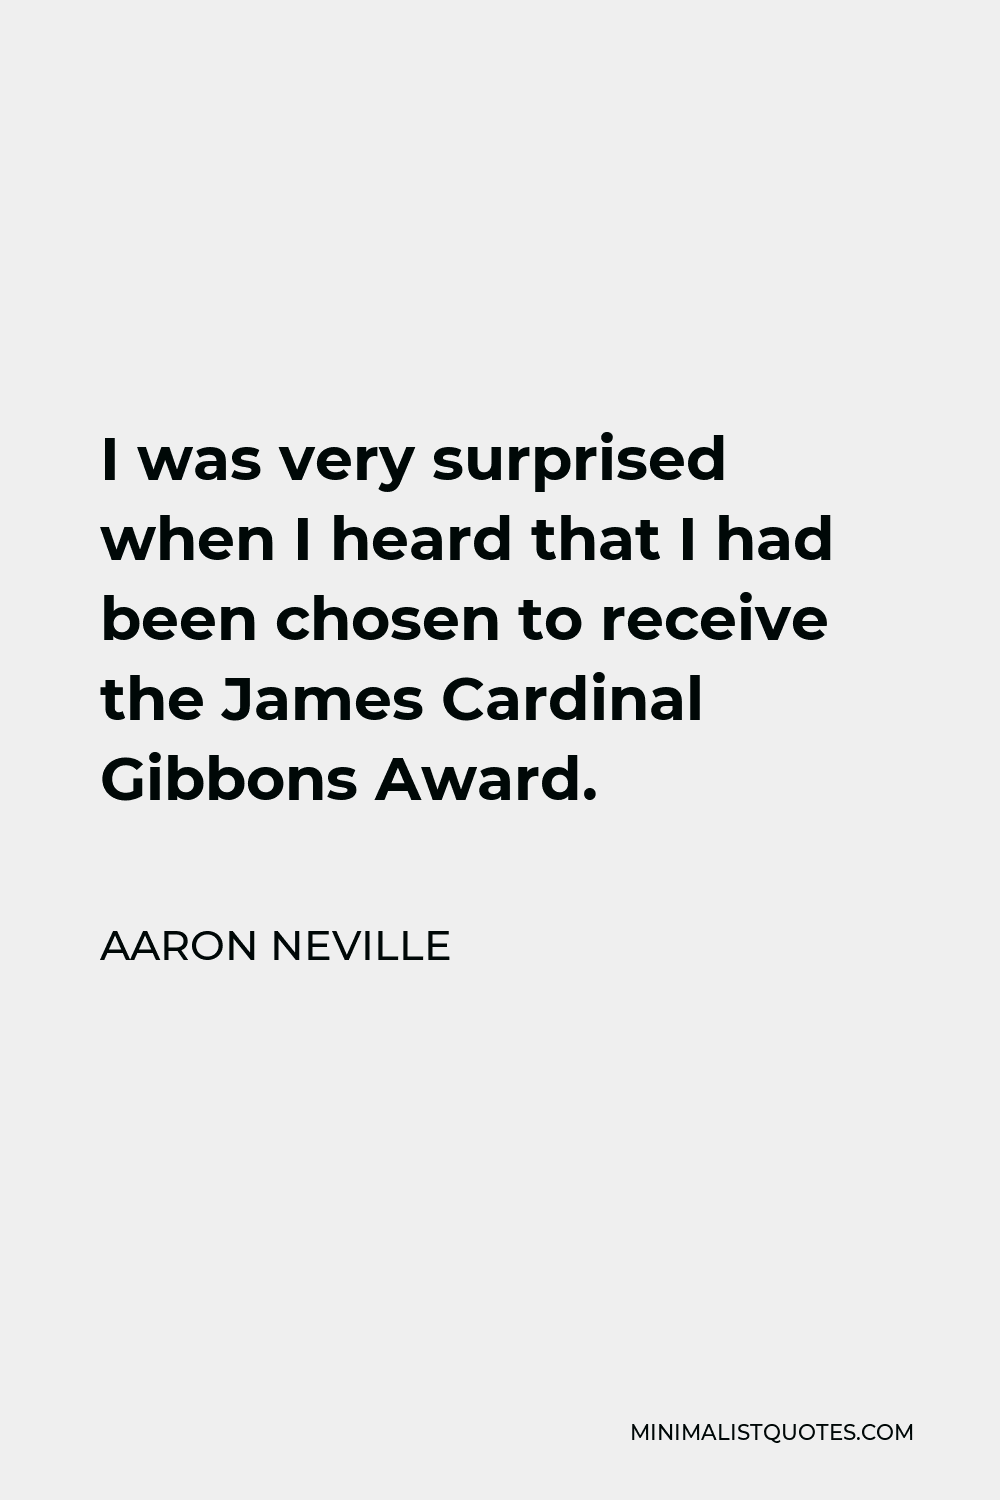 Aaron Neville Quote - I was very surprised when I heard that I had been chosen to receive the James Cardinal Gibbons Award.